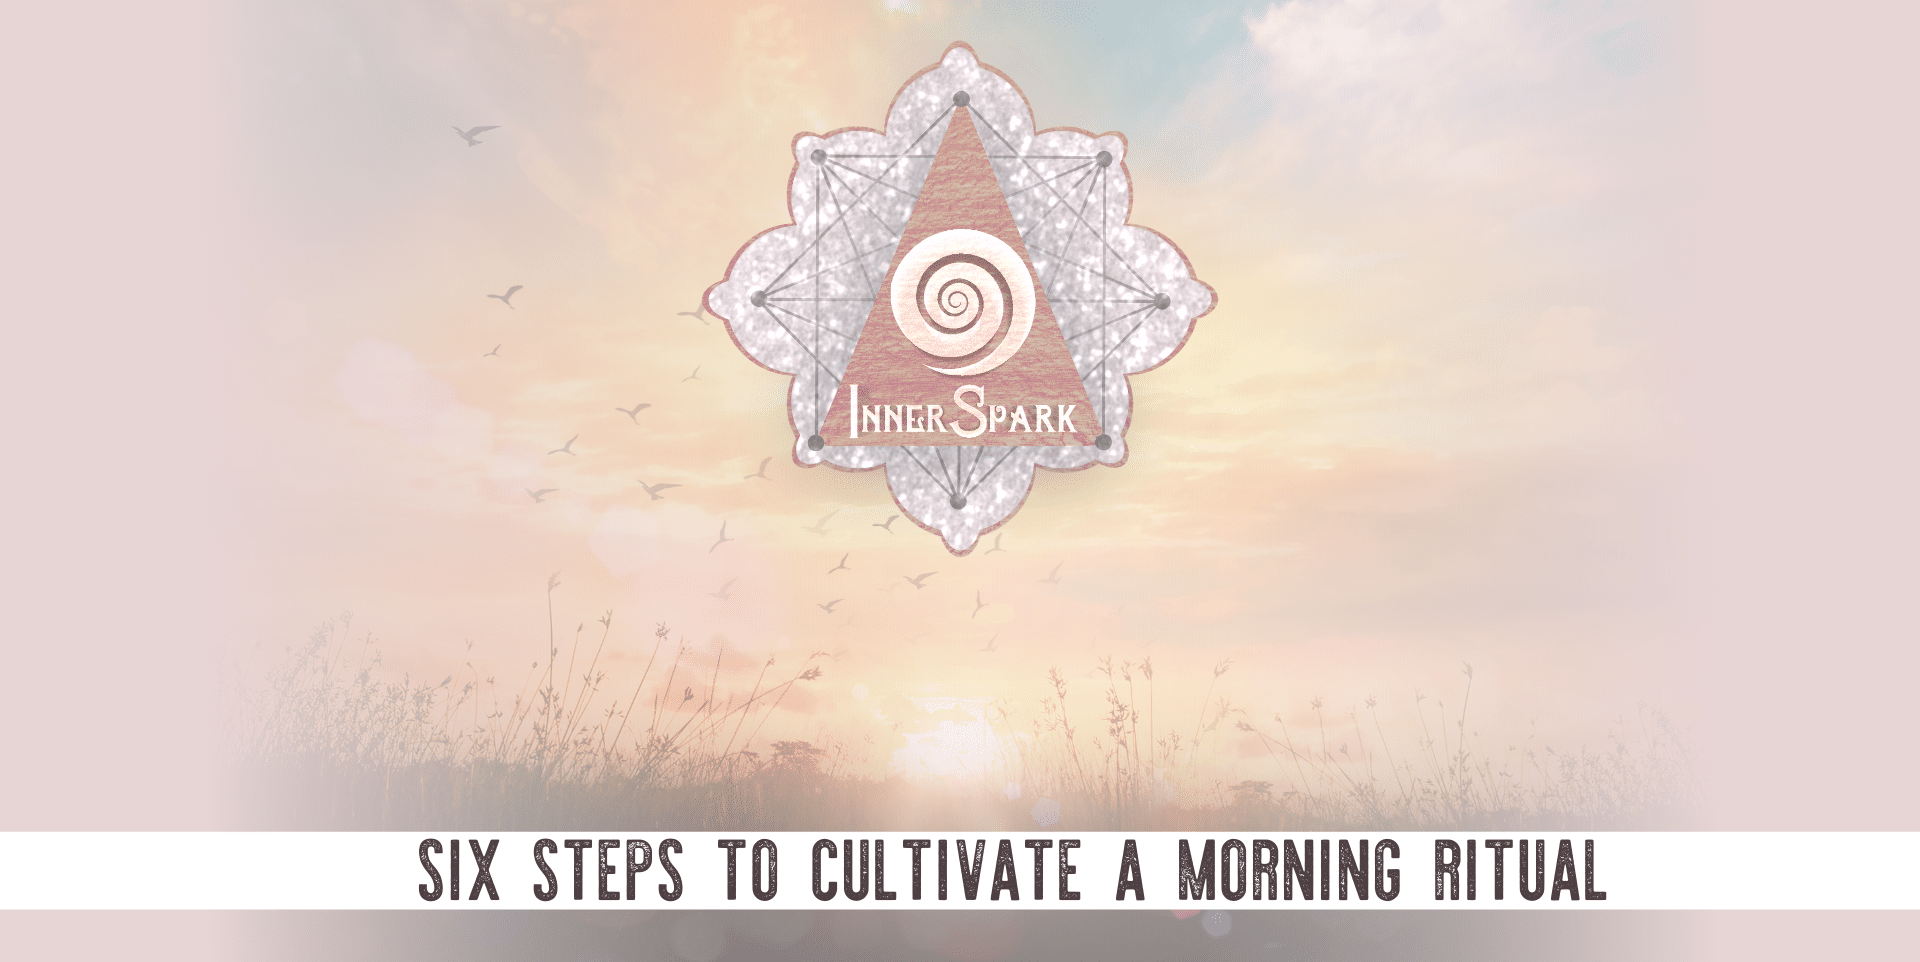 6 Steps to Cultivate a Morning Ritual